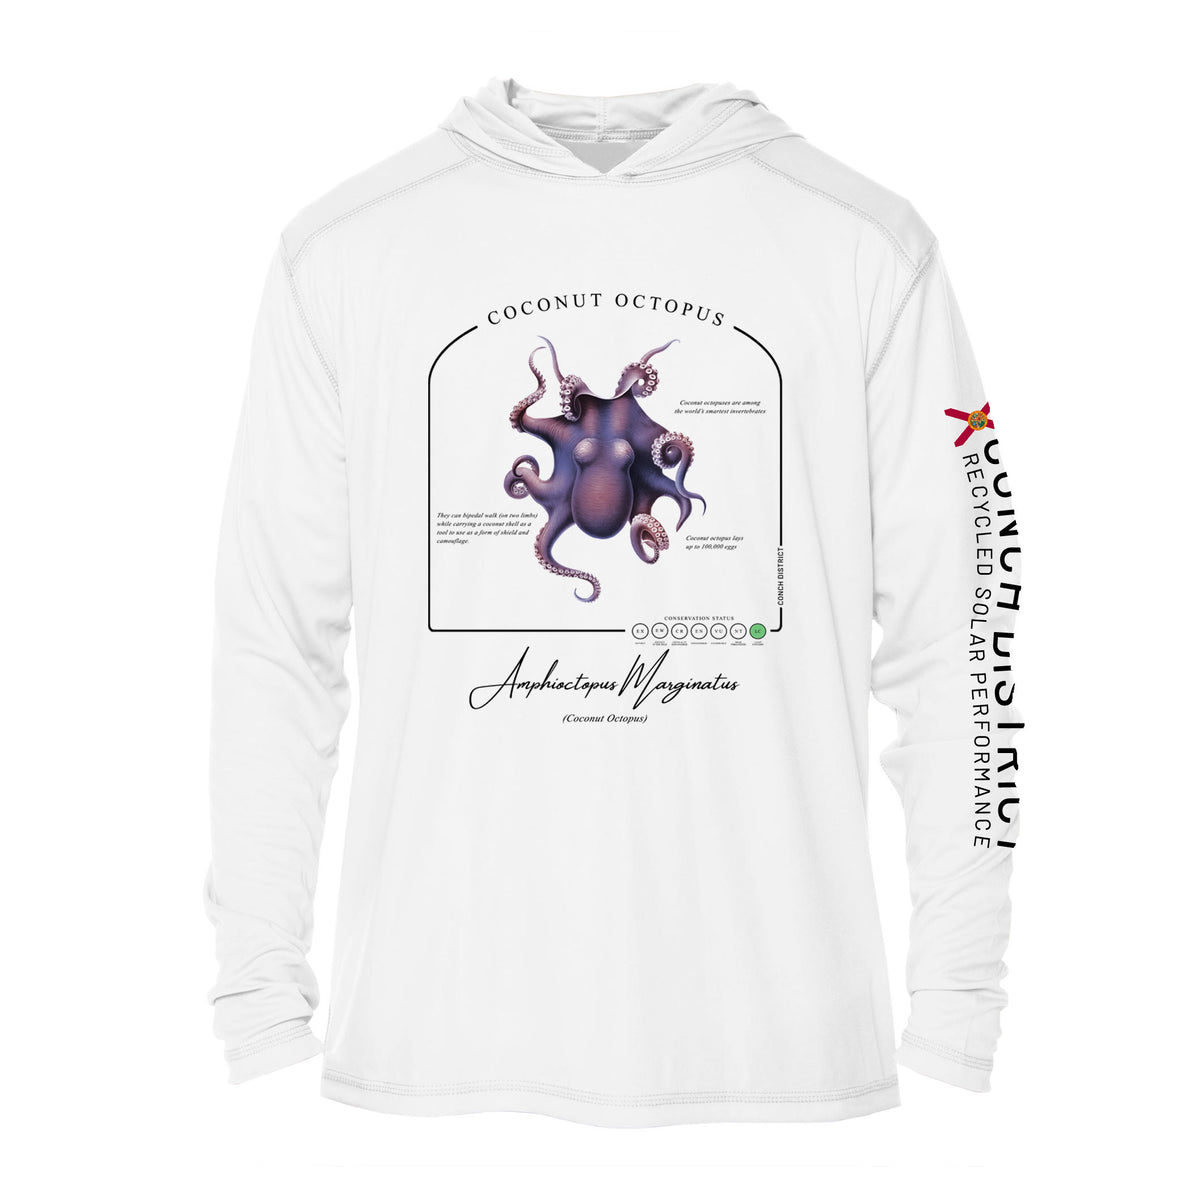 Octopus Performance Dry-Fit 50+UV Sun Protection Shirts -Reel Fishy Apparel